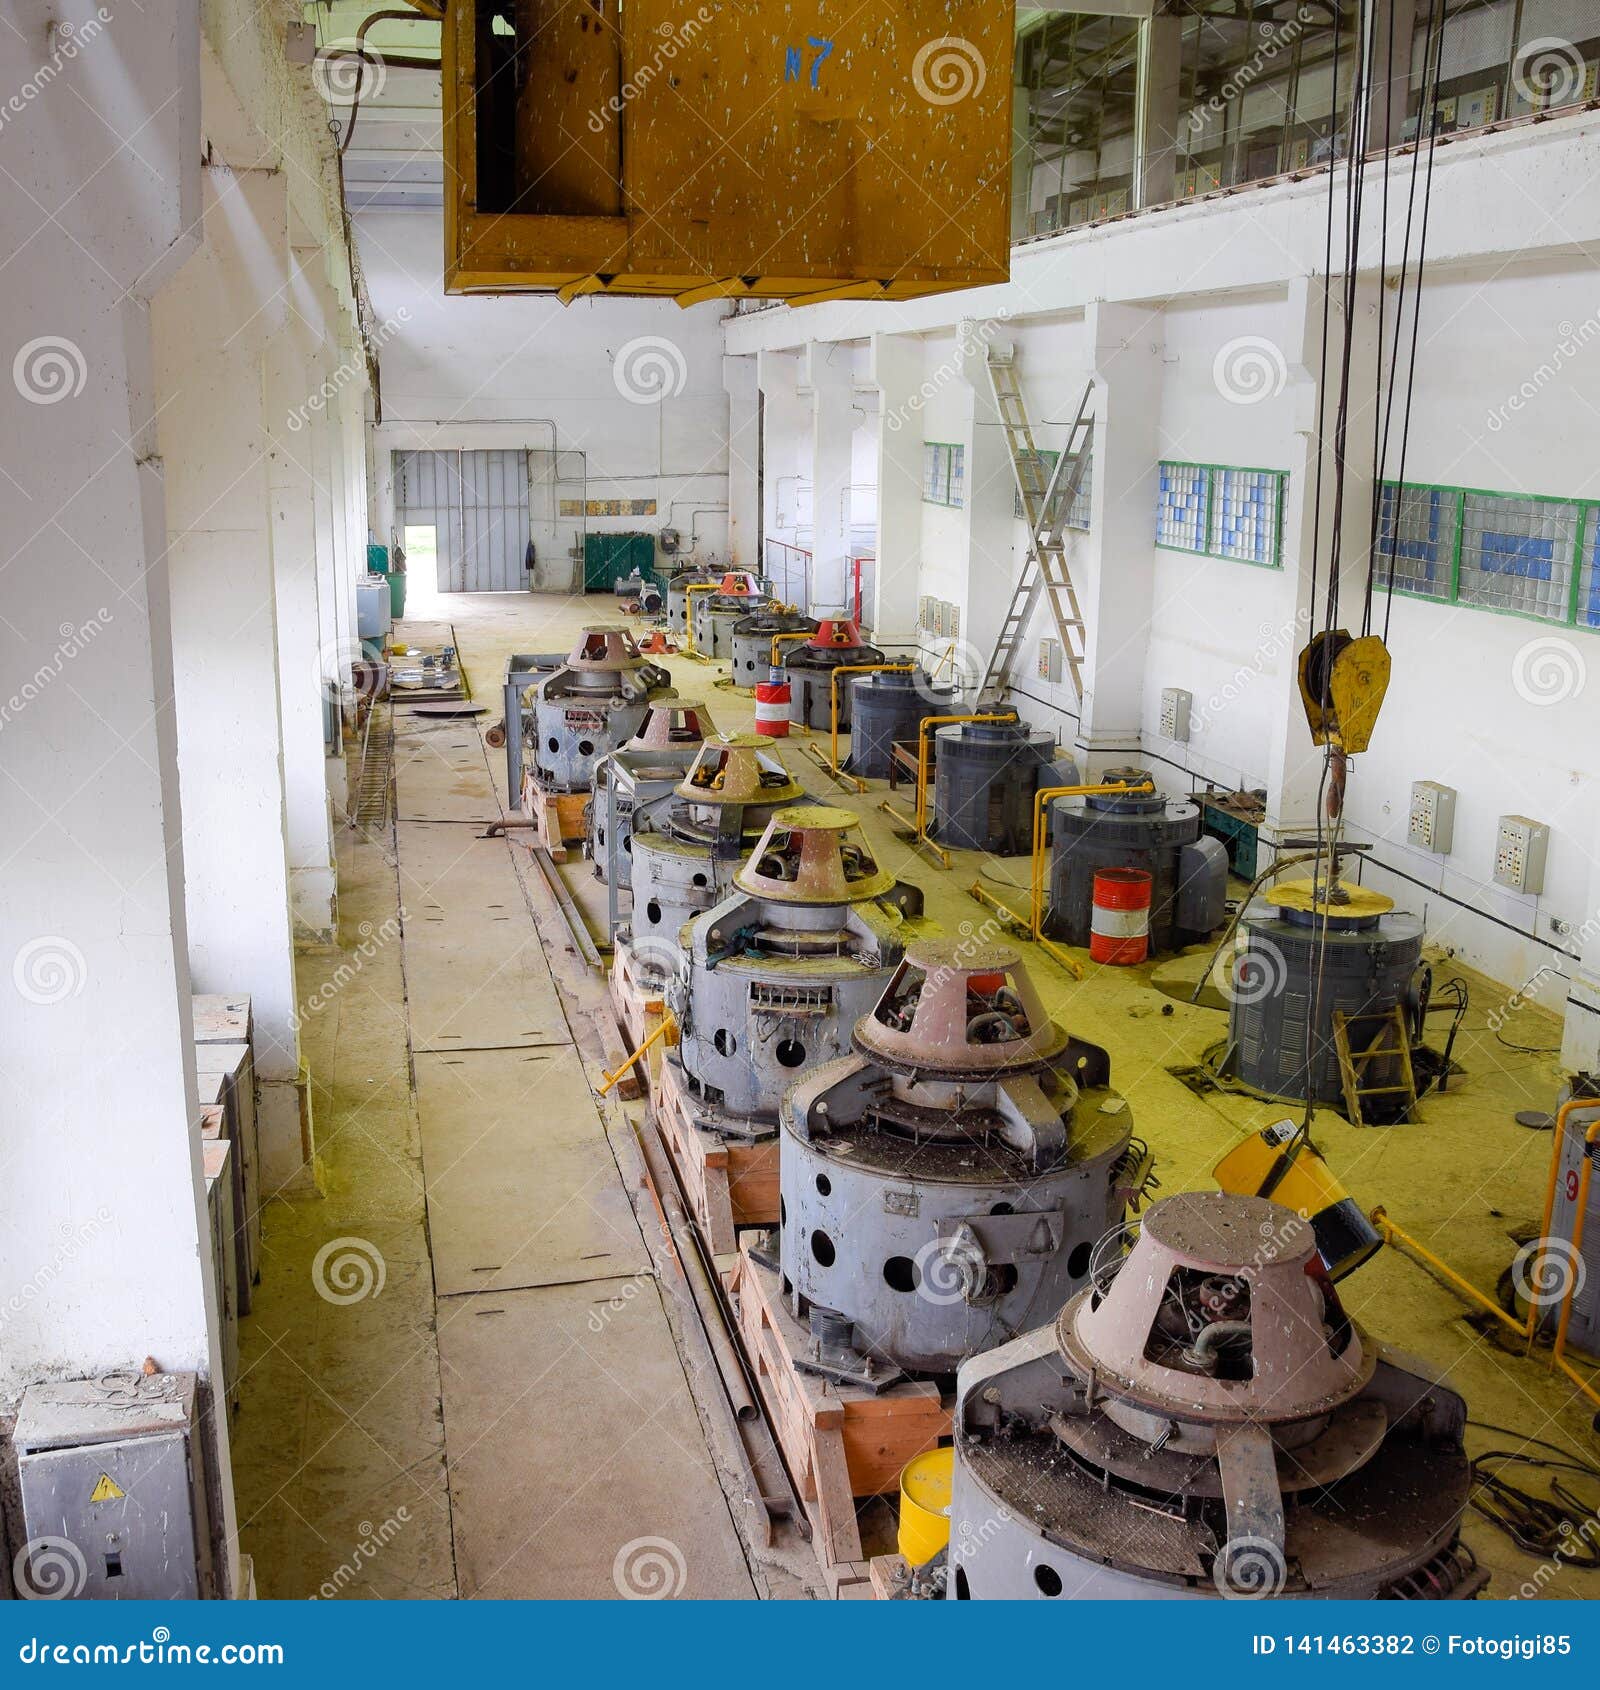 Engines Of Water Pumps At A Water Pumping Station. Pumping Irrig Stock Image electrical, industry: 141463382